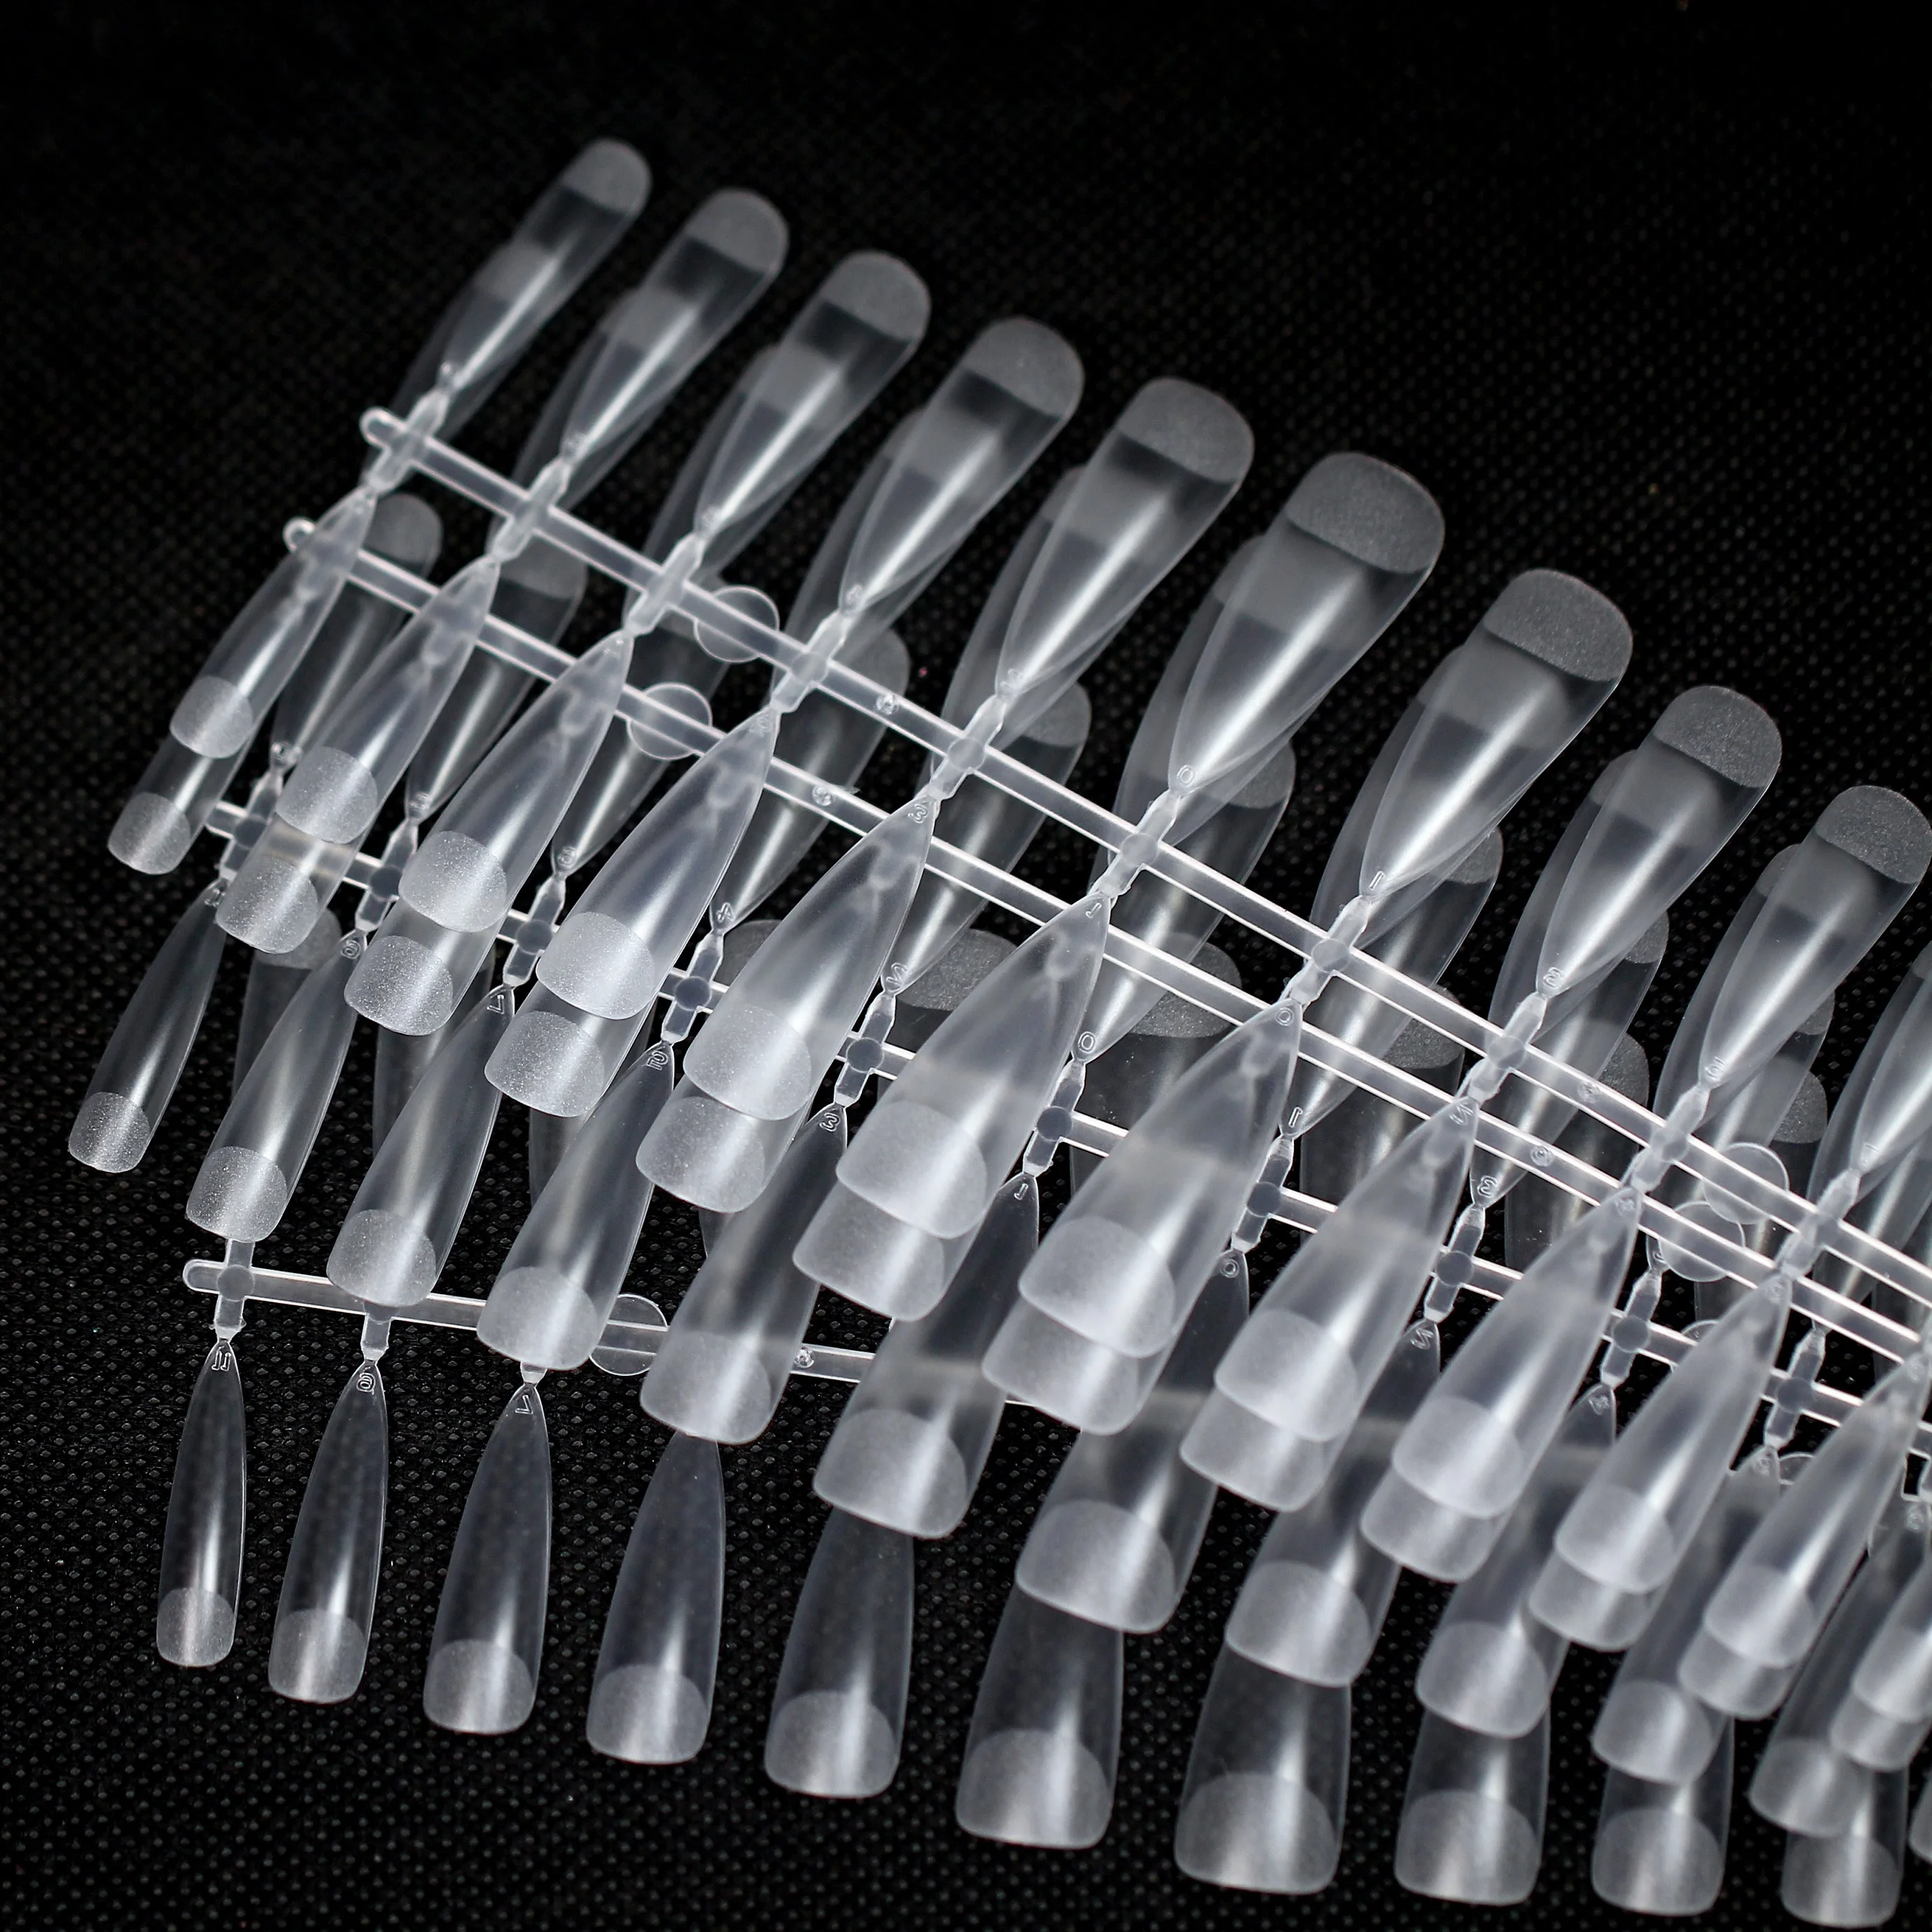 

Clear Acrylic Coffin Long Tips 240pcs Box For Nail Salons and DIY Full Cover Artificial False Nail Tips, Transparent